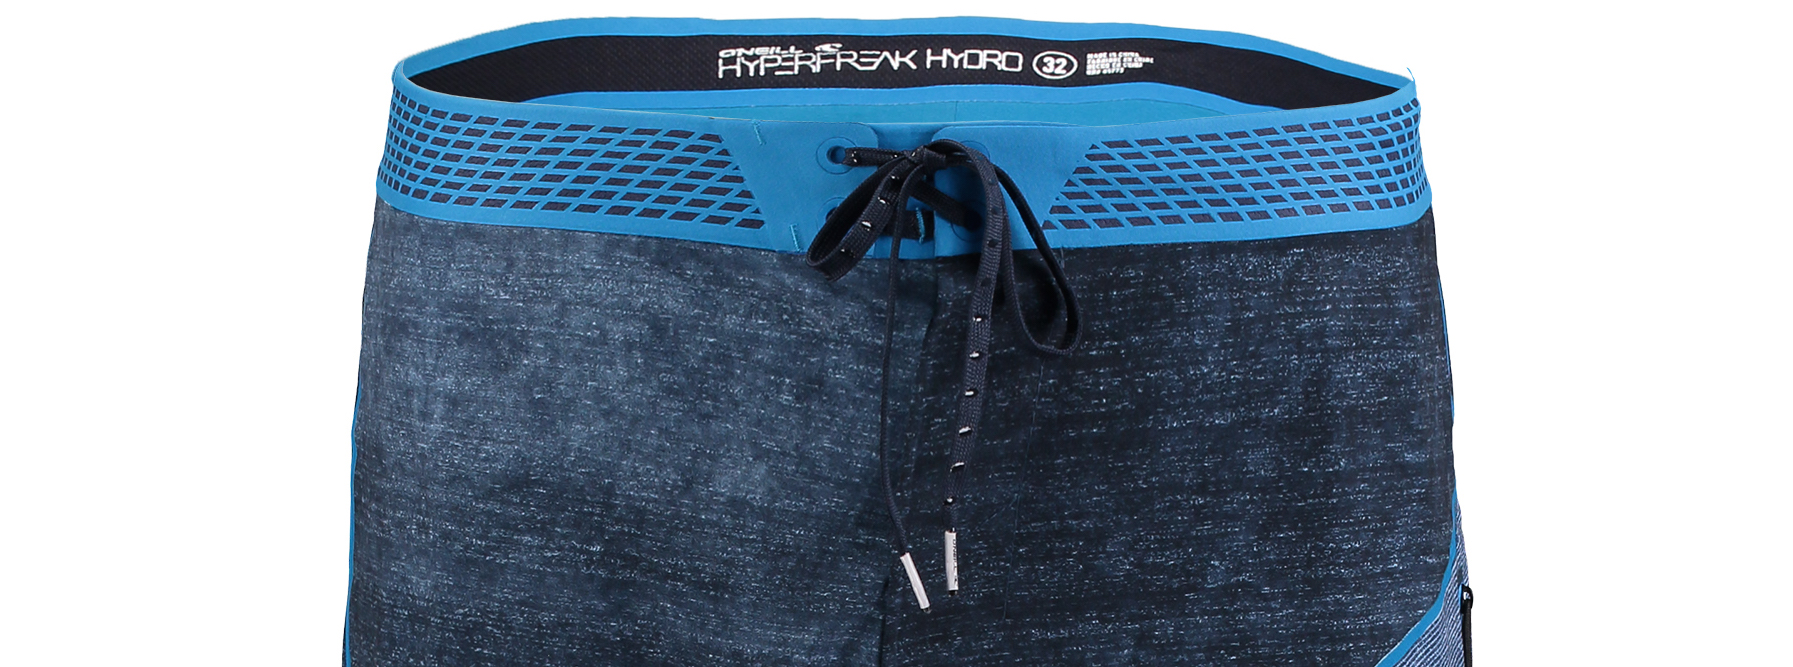 Boardshorts for Surfing: Hyperfreak Hydro boardshorts by O'Neill with silicone grip drawcard